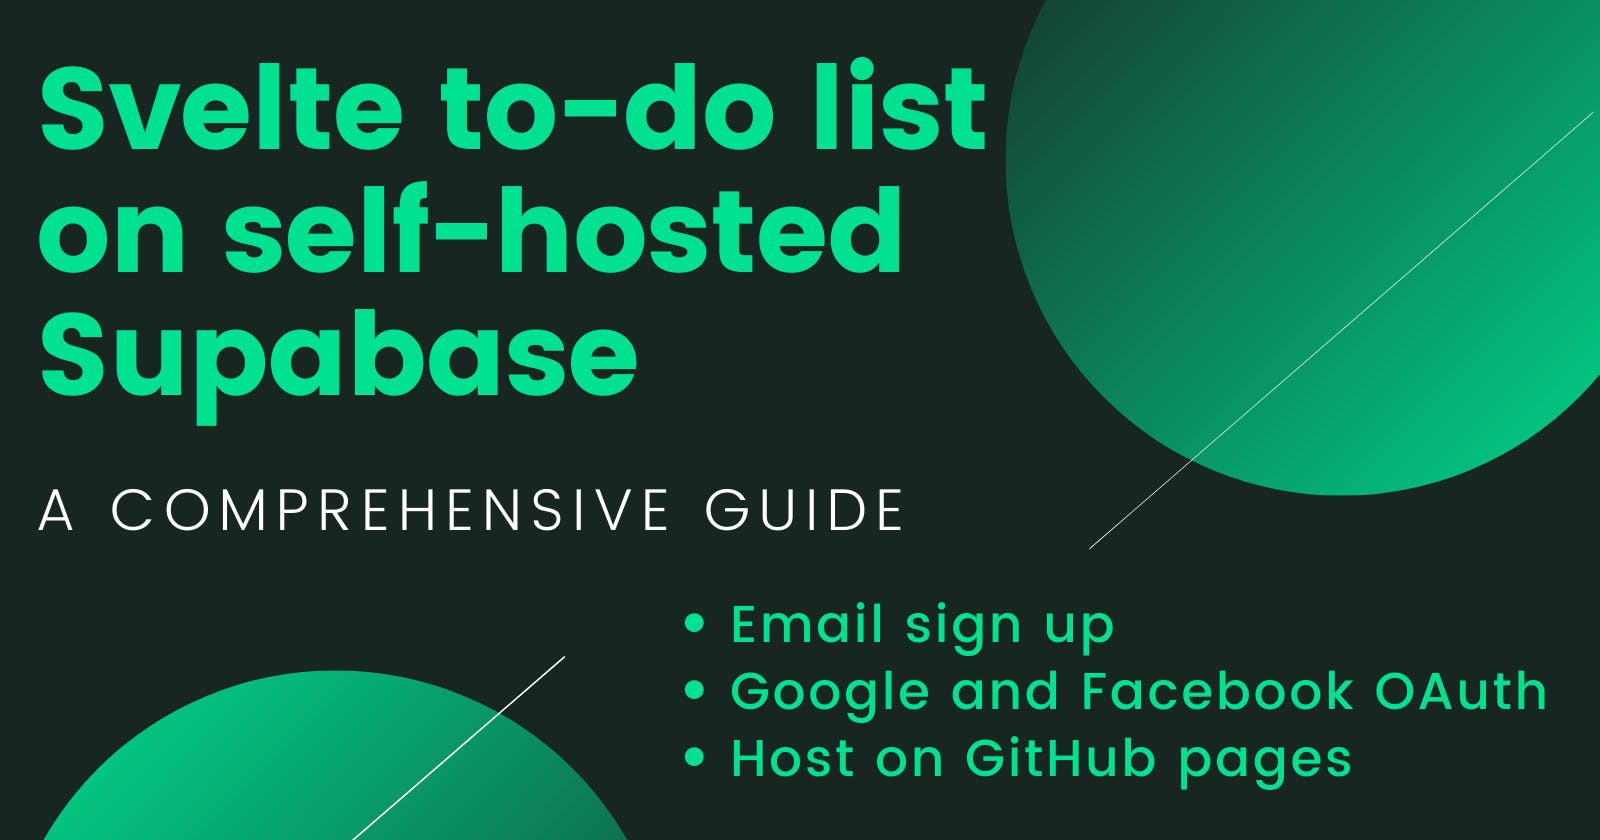 Set up a Svelte todo list on self-hosted Supabase + Email sign up + Google, Facebook Auth + host on GitHub pages